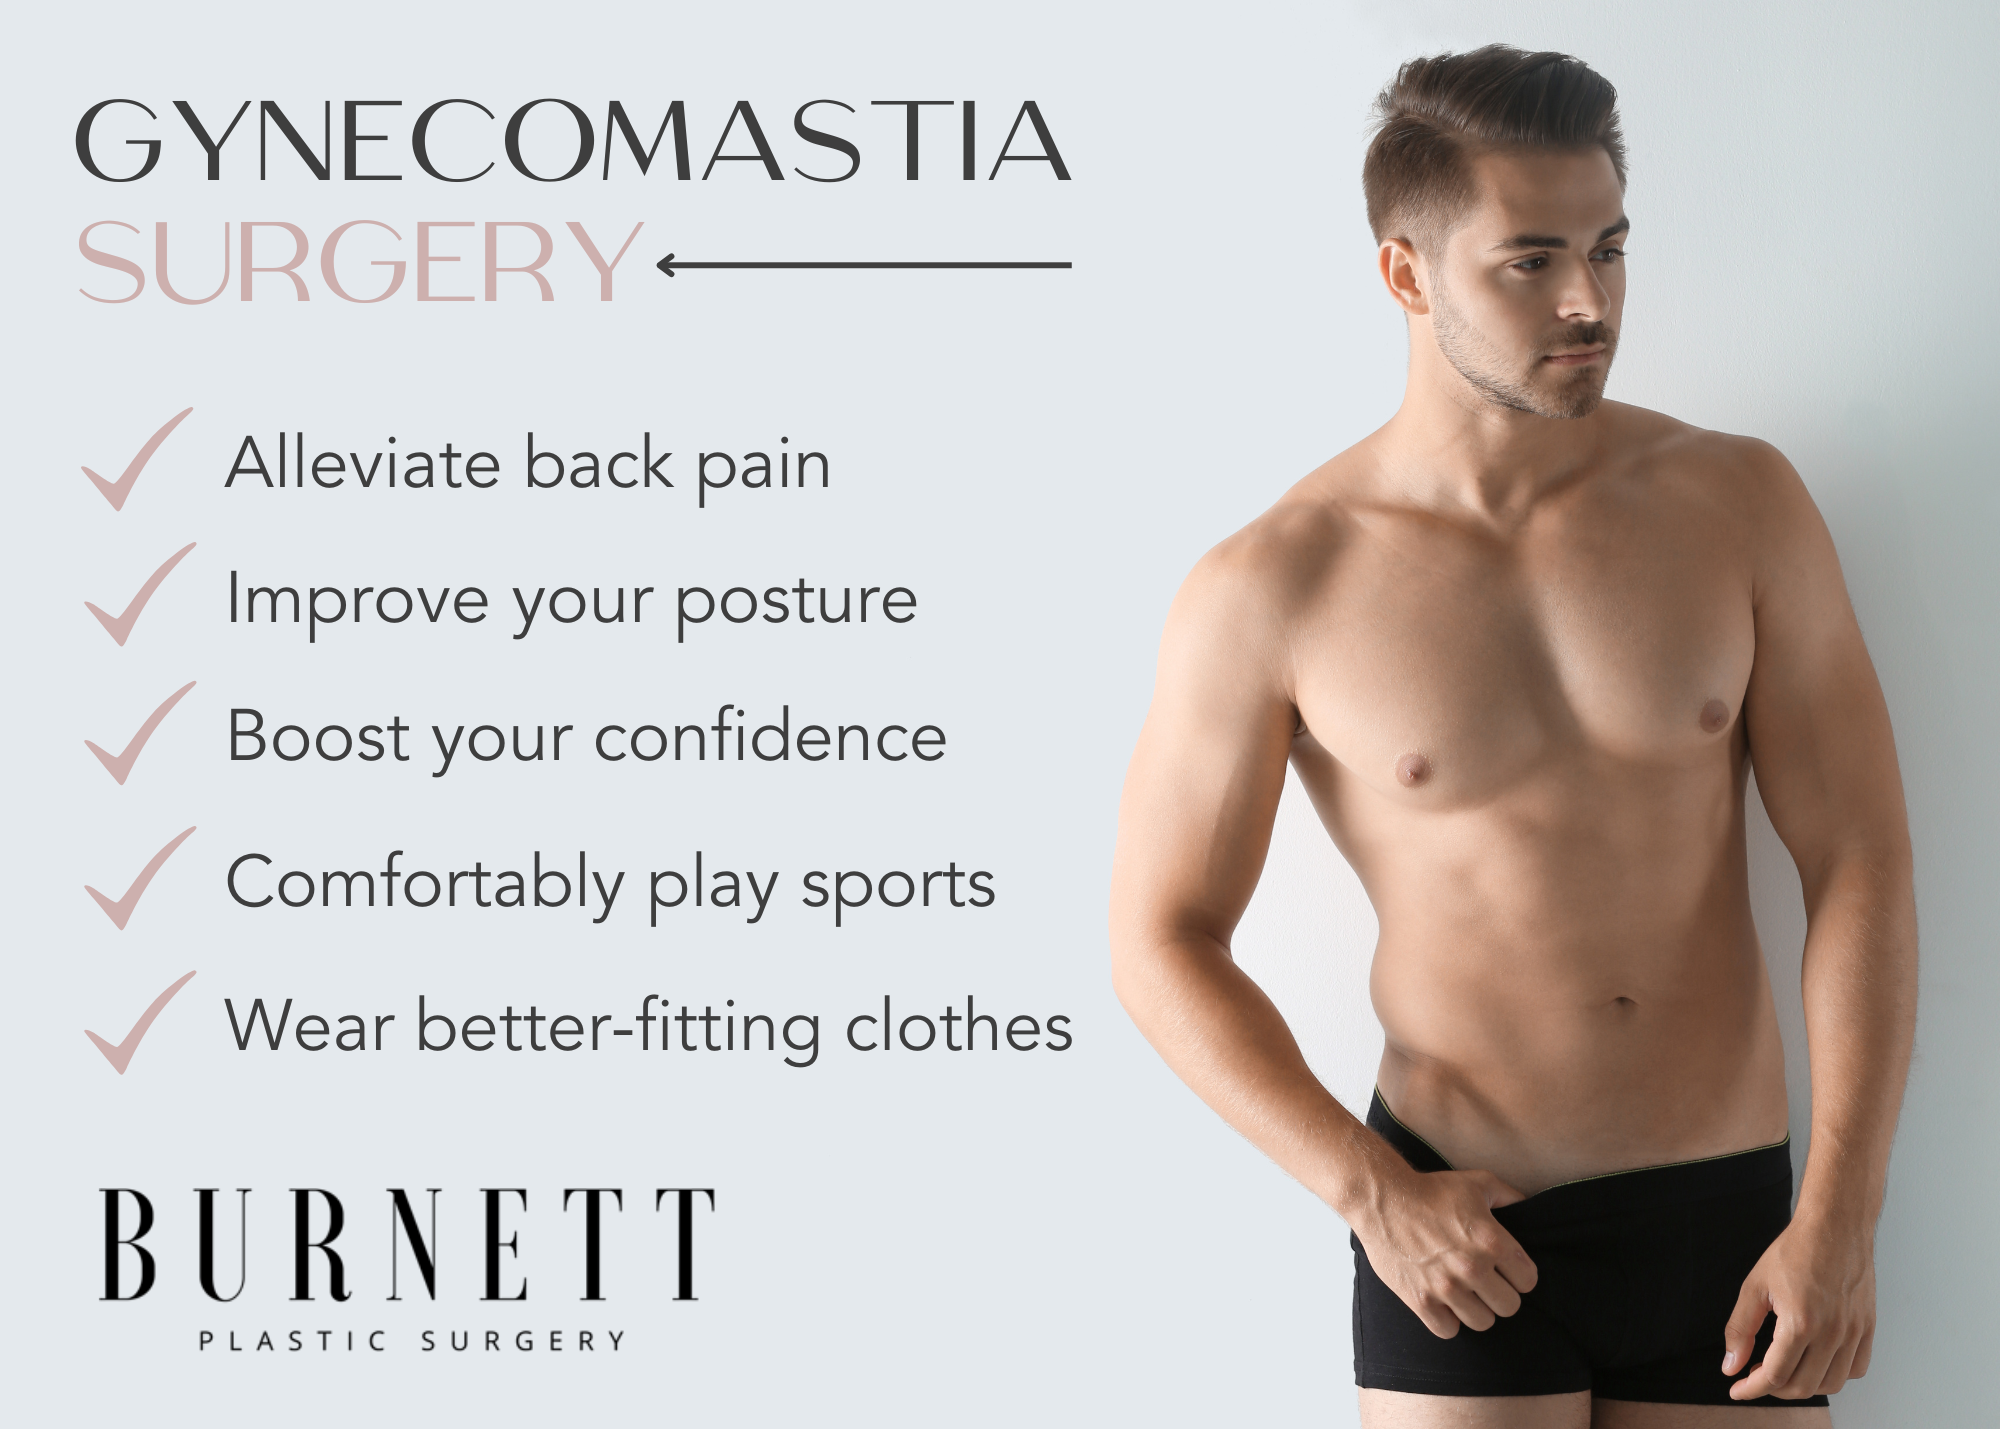 See what gynecomastia surgery at NJ’s Burnet Plastic Surgery can do.